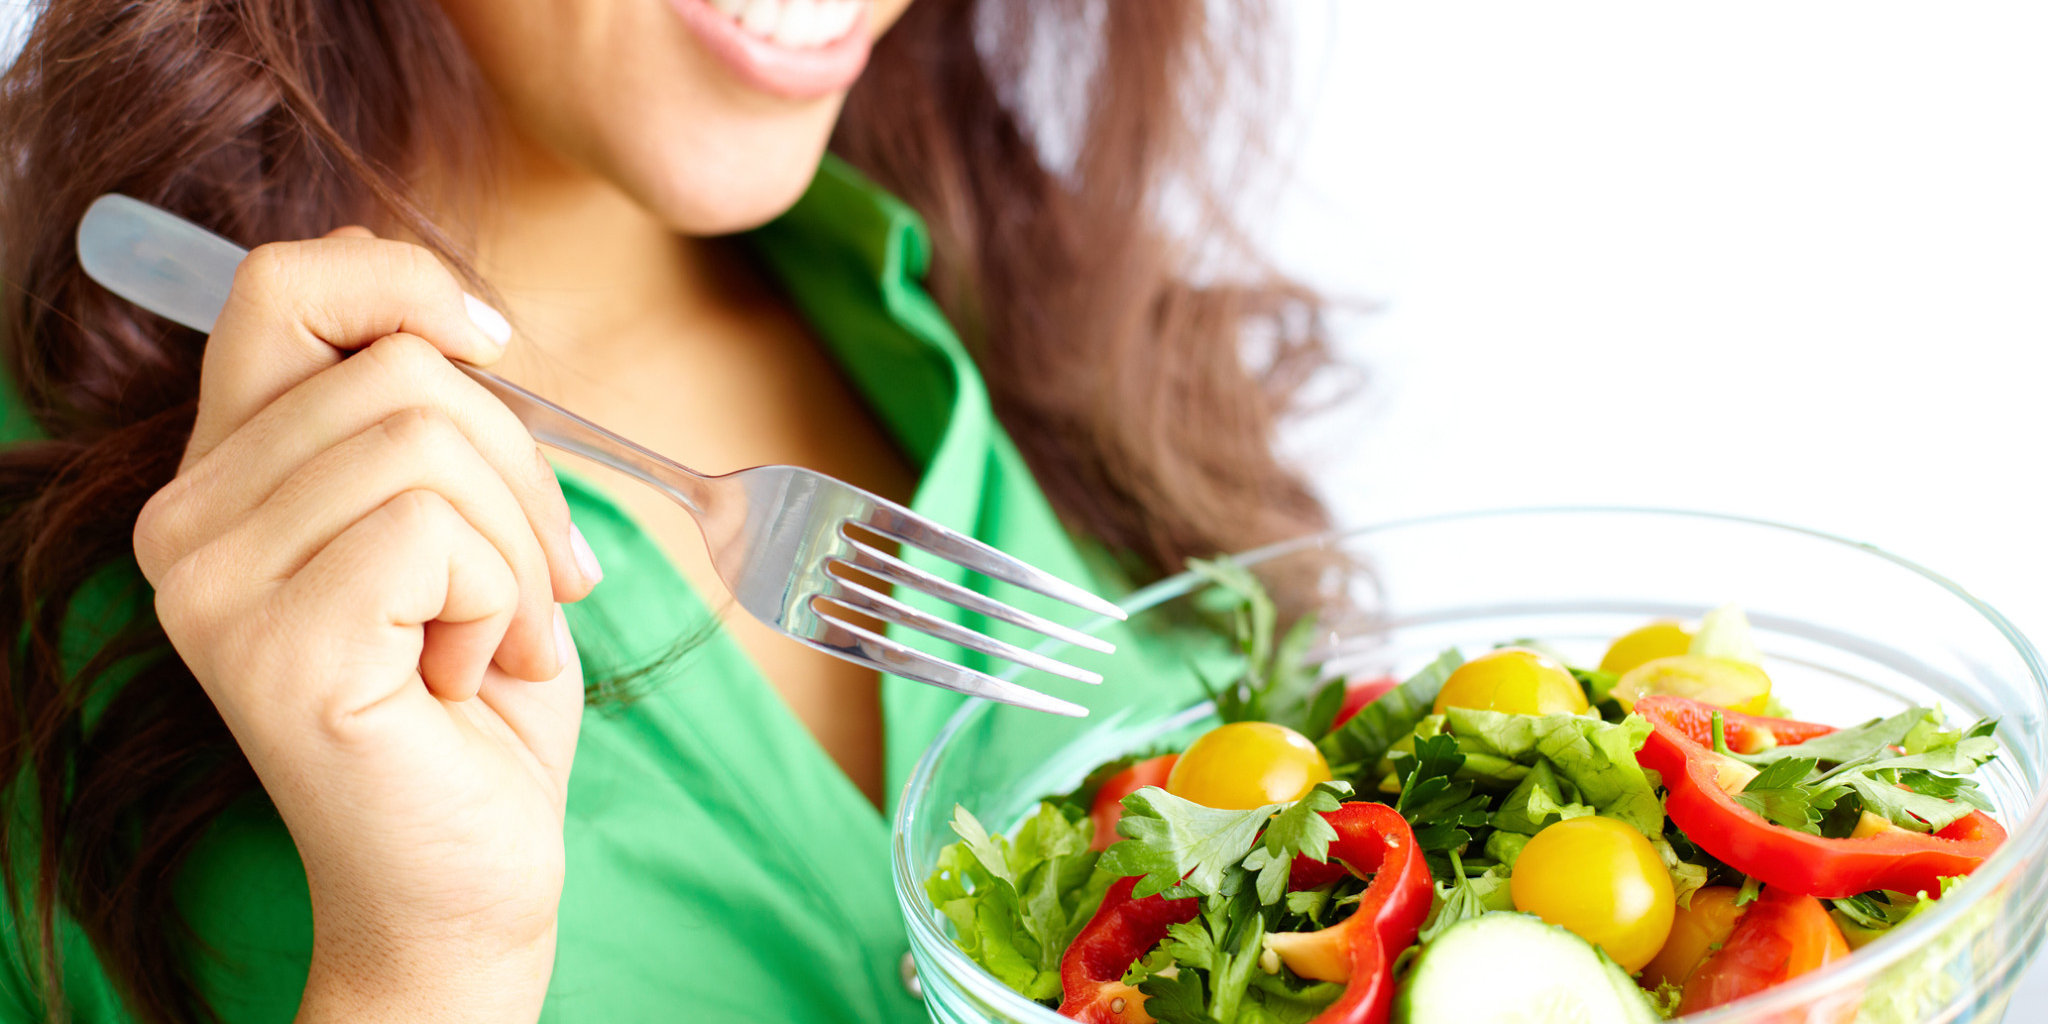 Maintaining your weight with vegetables and fruits